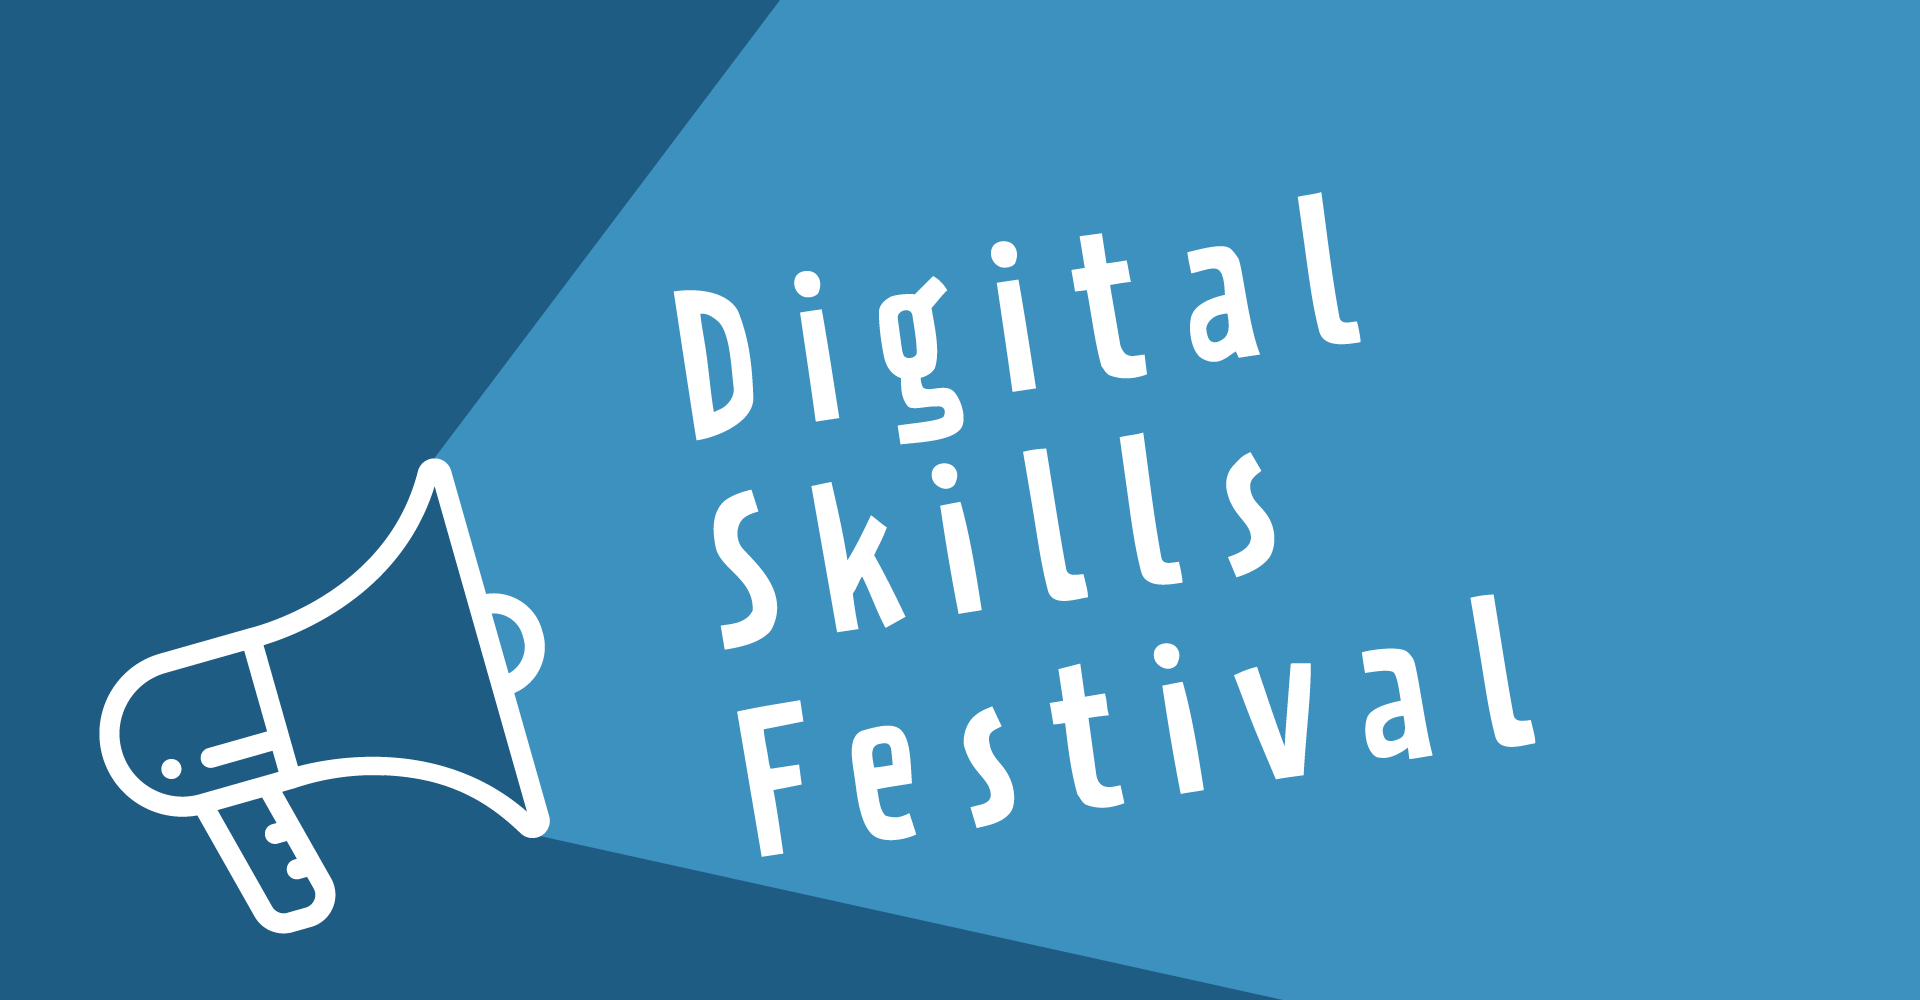 Image of a megaphone on a blue background with the text 'Digital Skills Festival' displayed